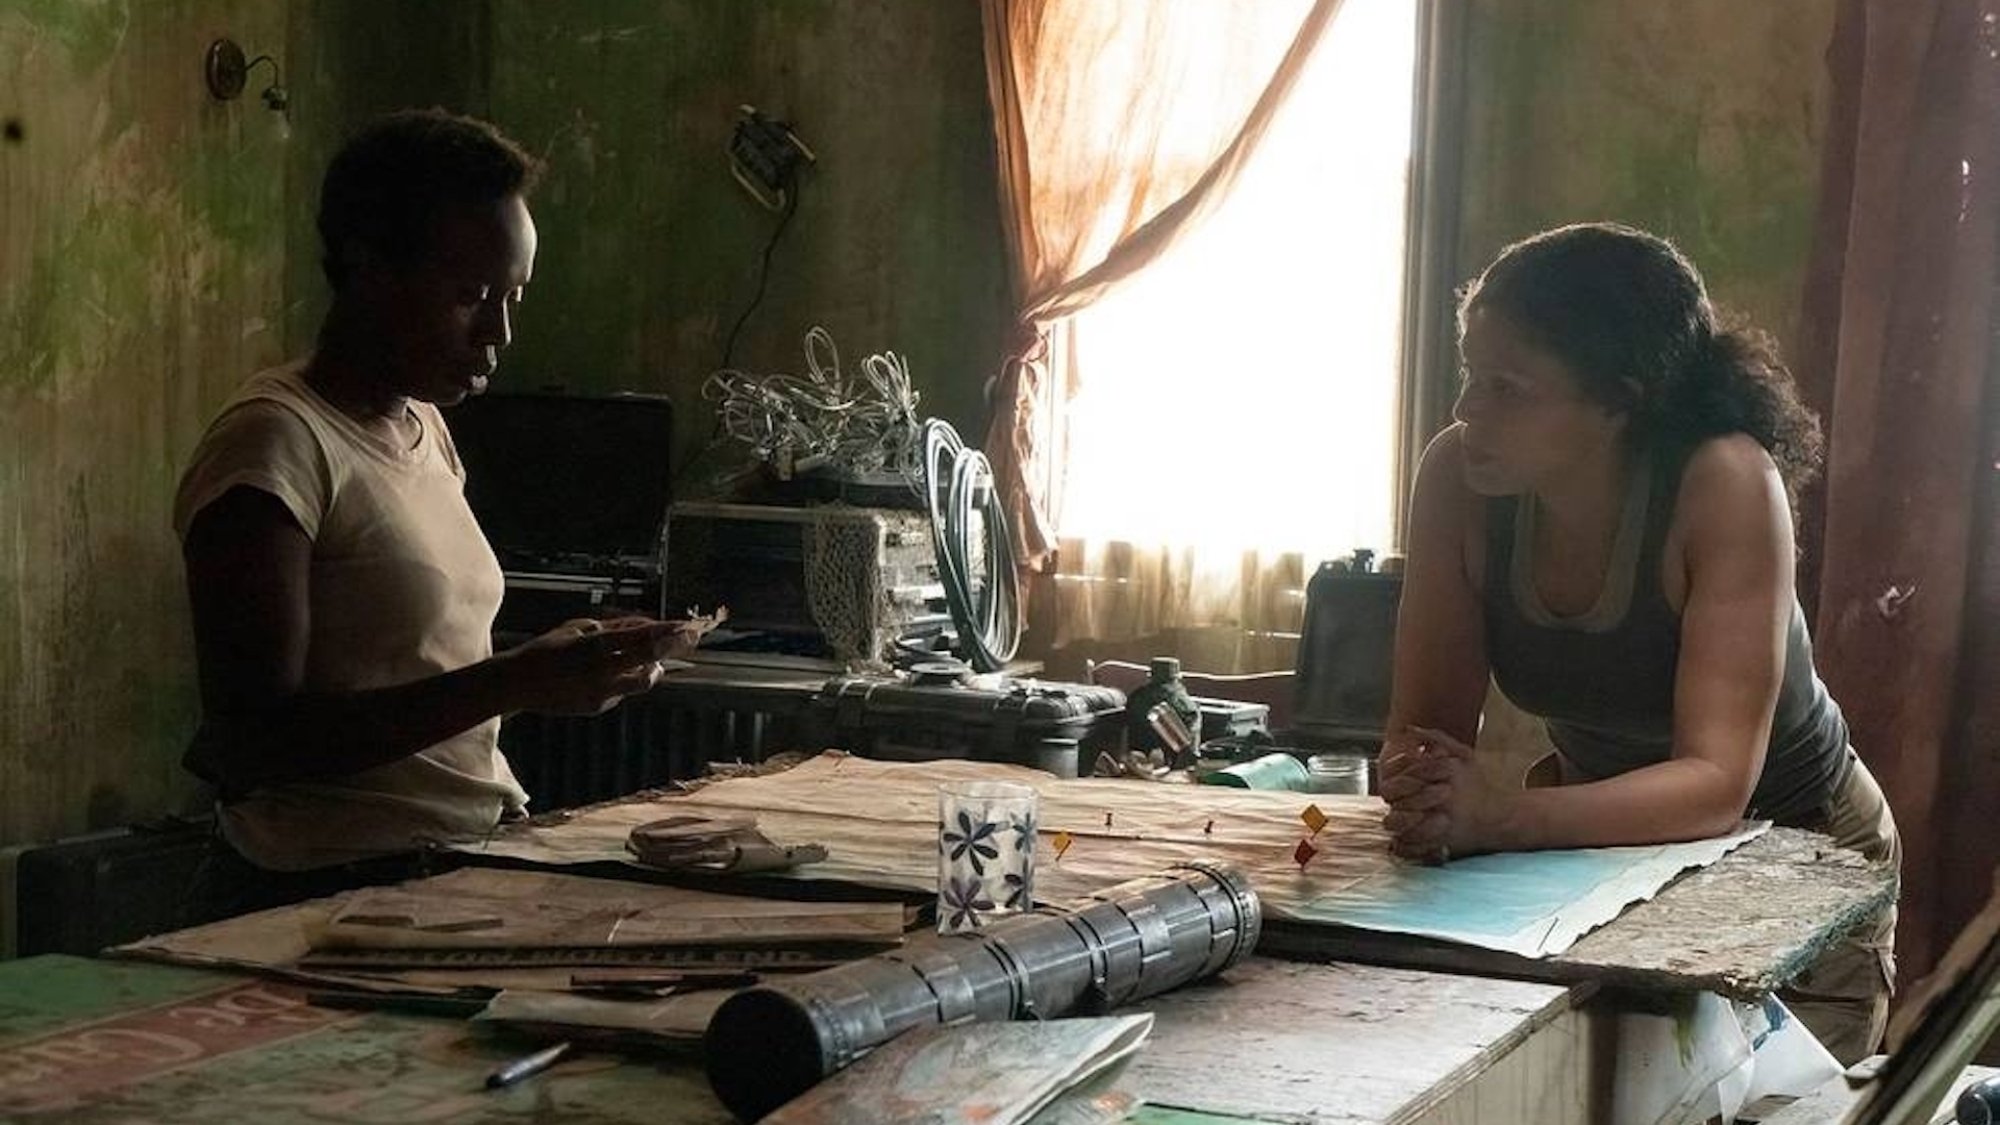 Two women wearing military tank tops stand considering a map on a table in a dilapidated apartment.